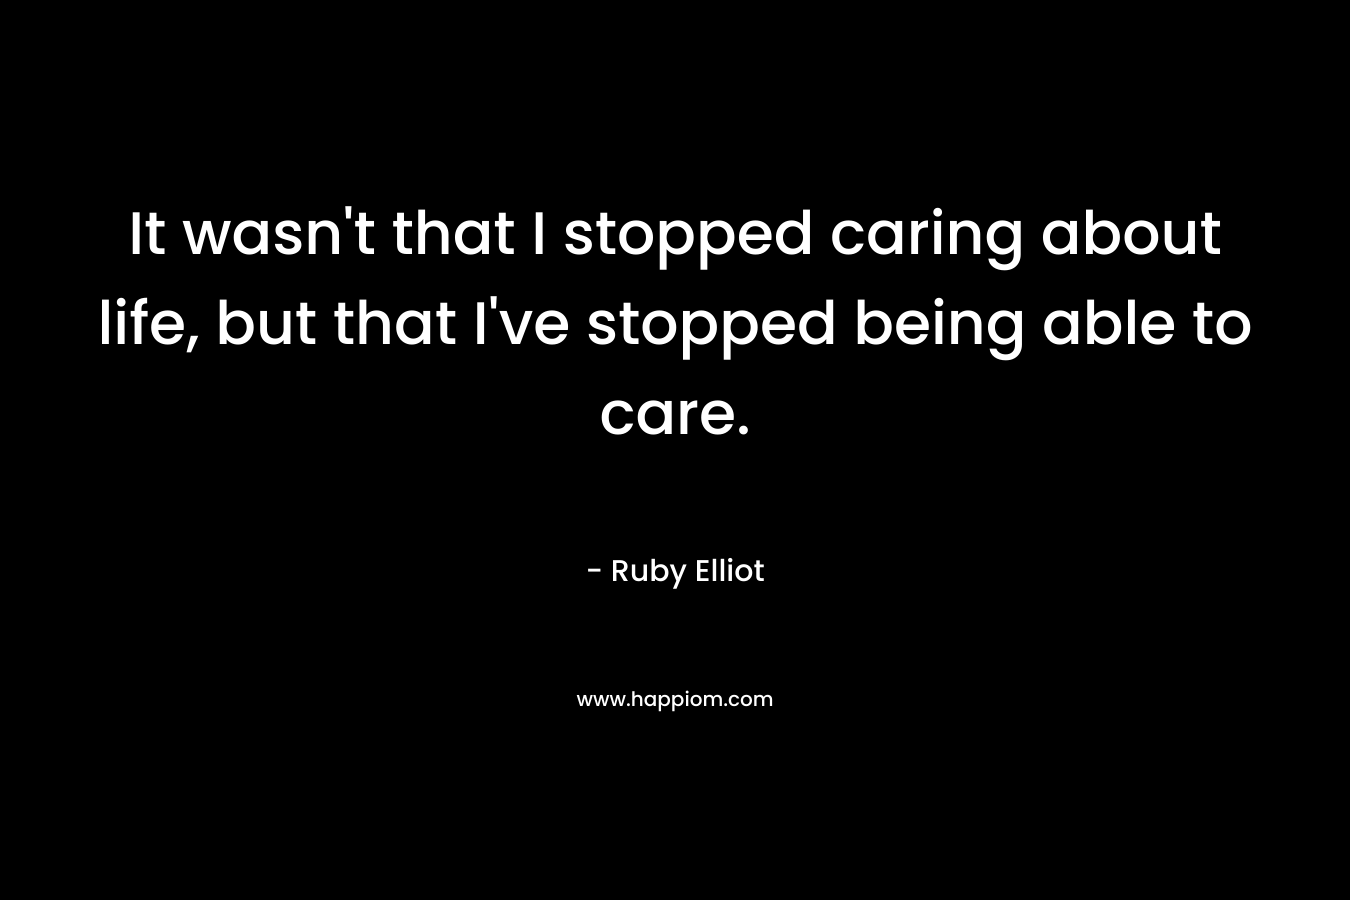 It wasn't that I stopped caring about life, but that I've stopped being able to care.